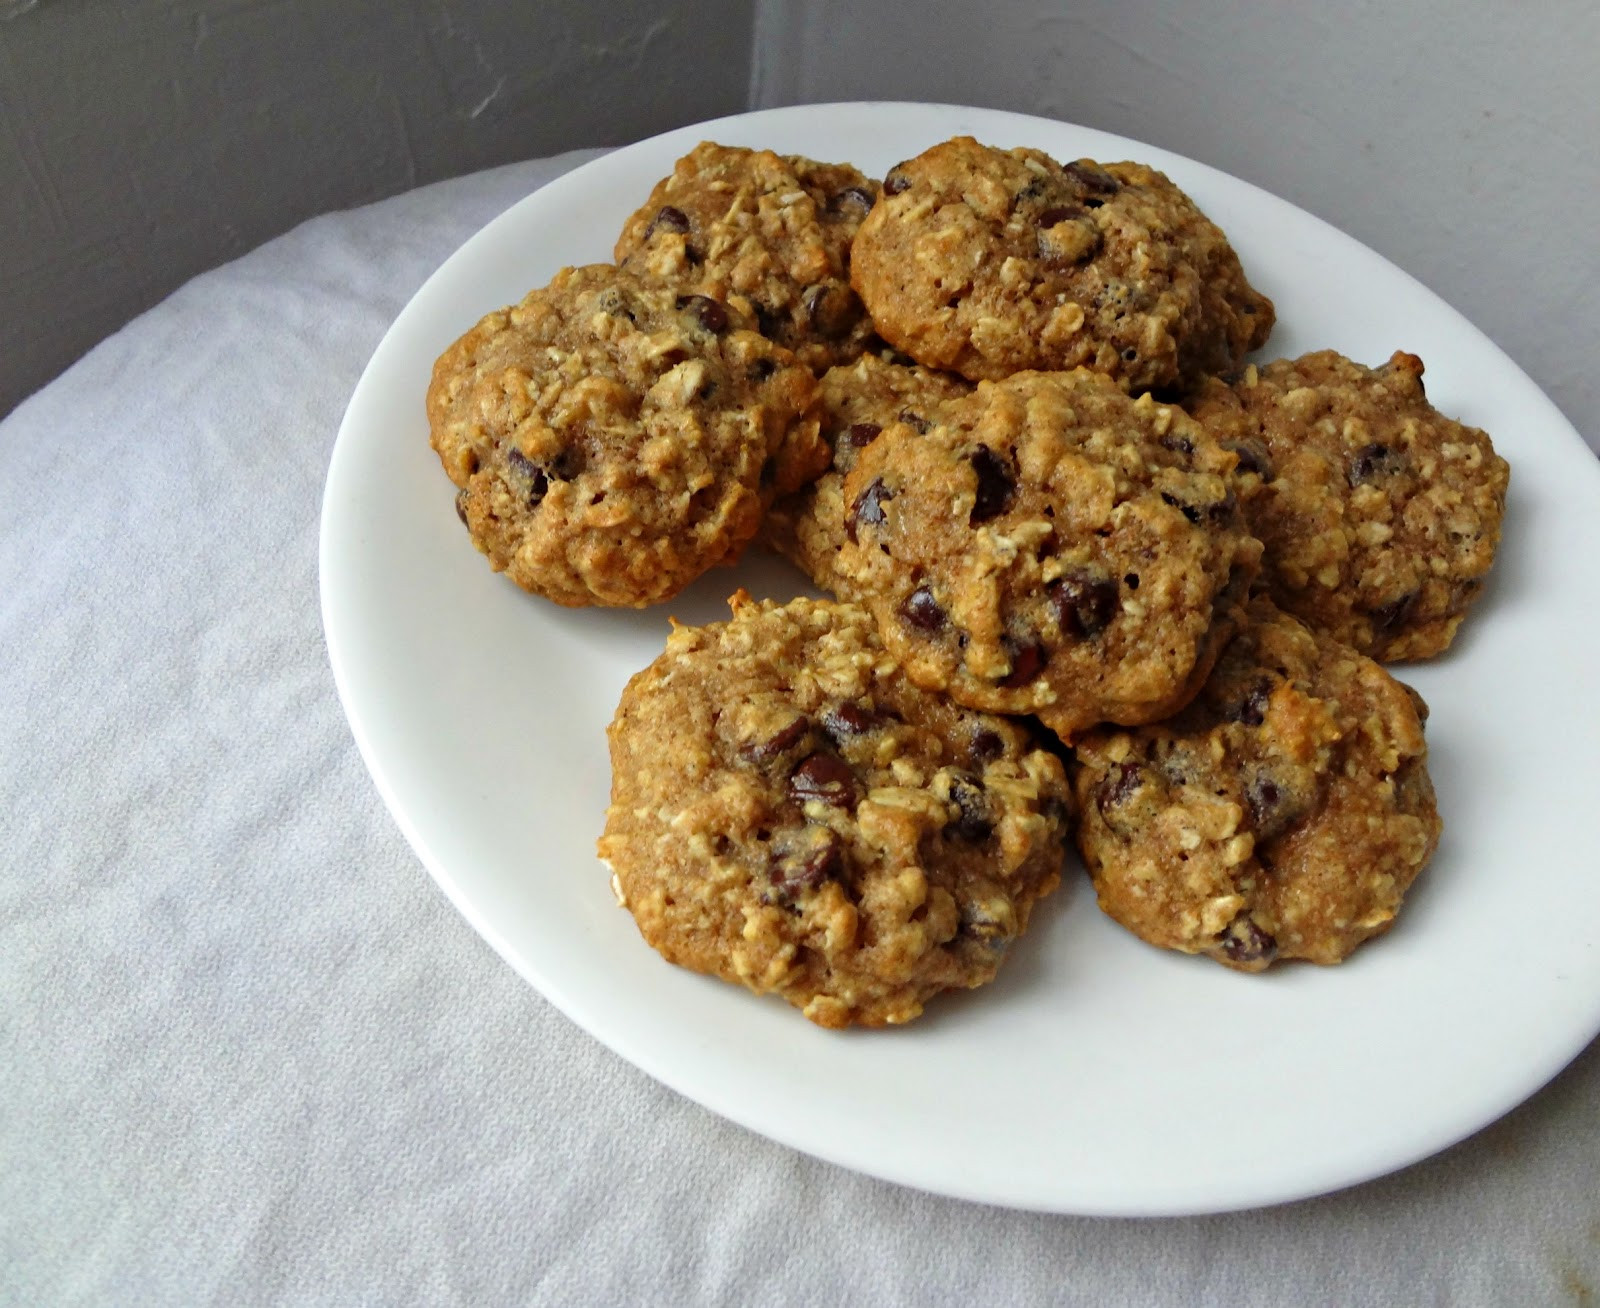 Oat Chocolate Chip Cookies Healthy
 The Cooking Actress Healthy Oatmeal Chocolate Chip Cookies